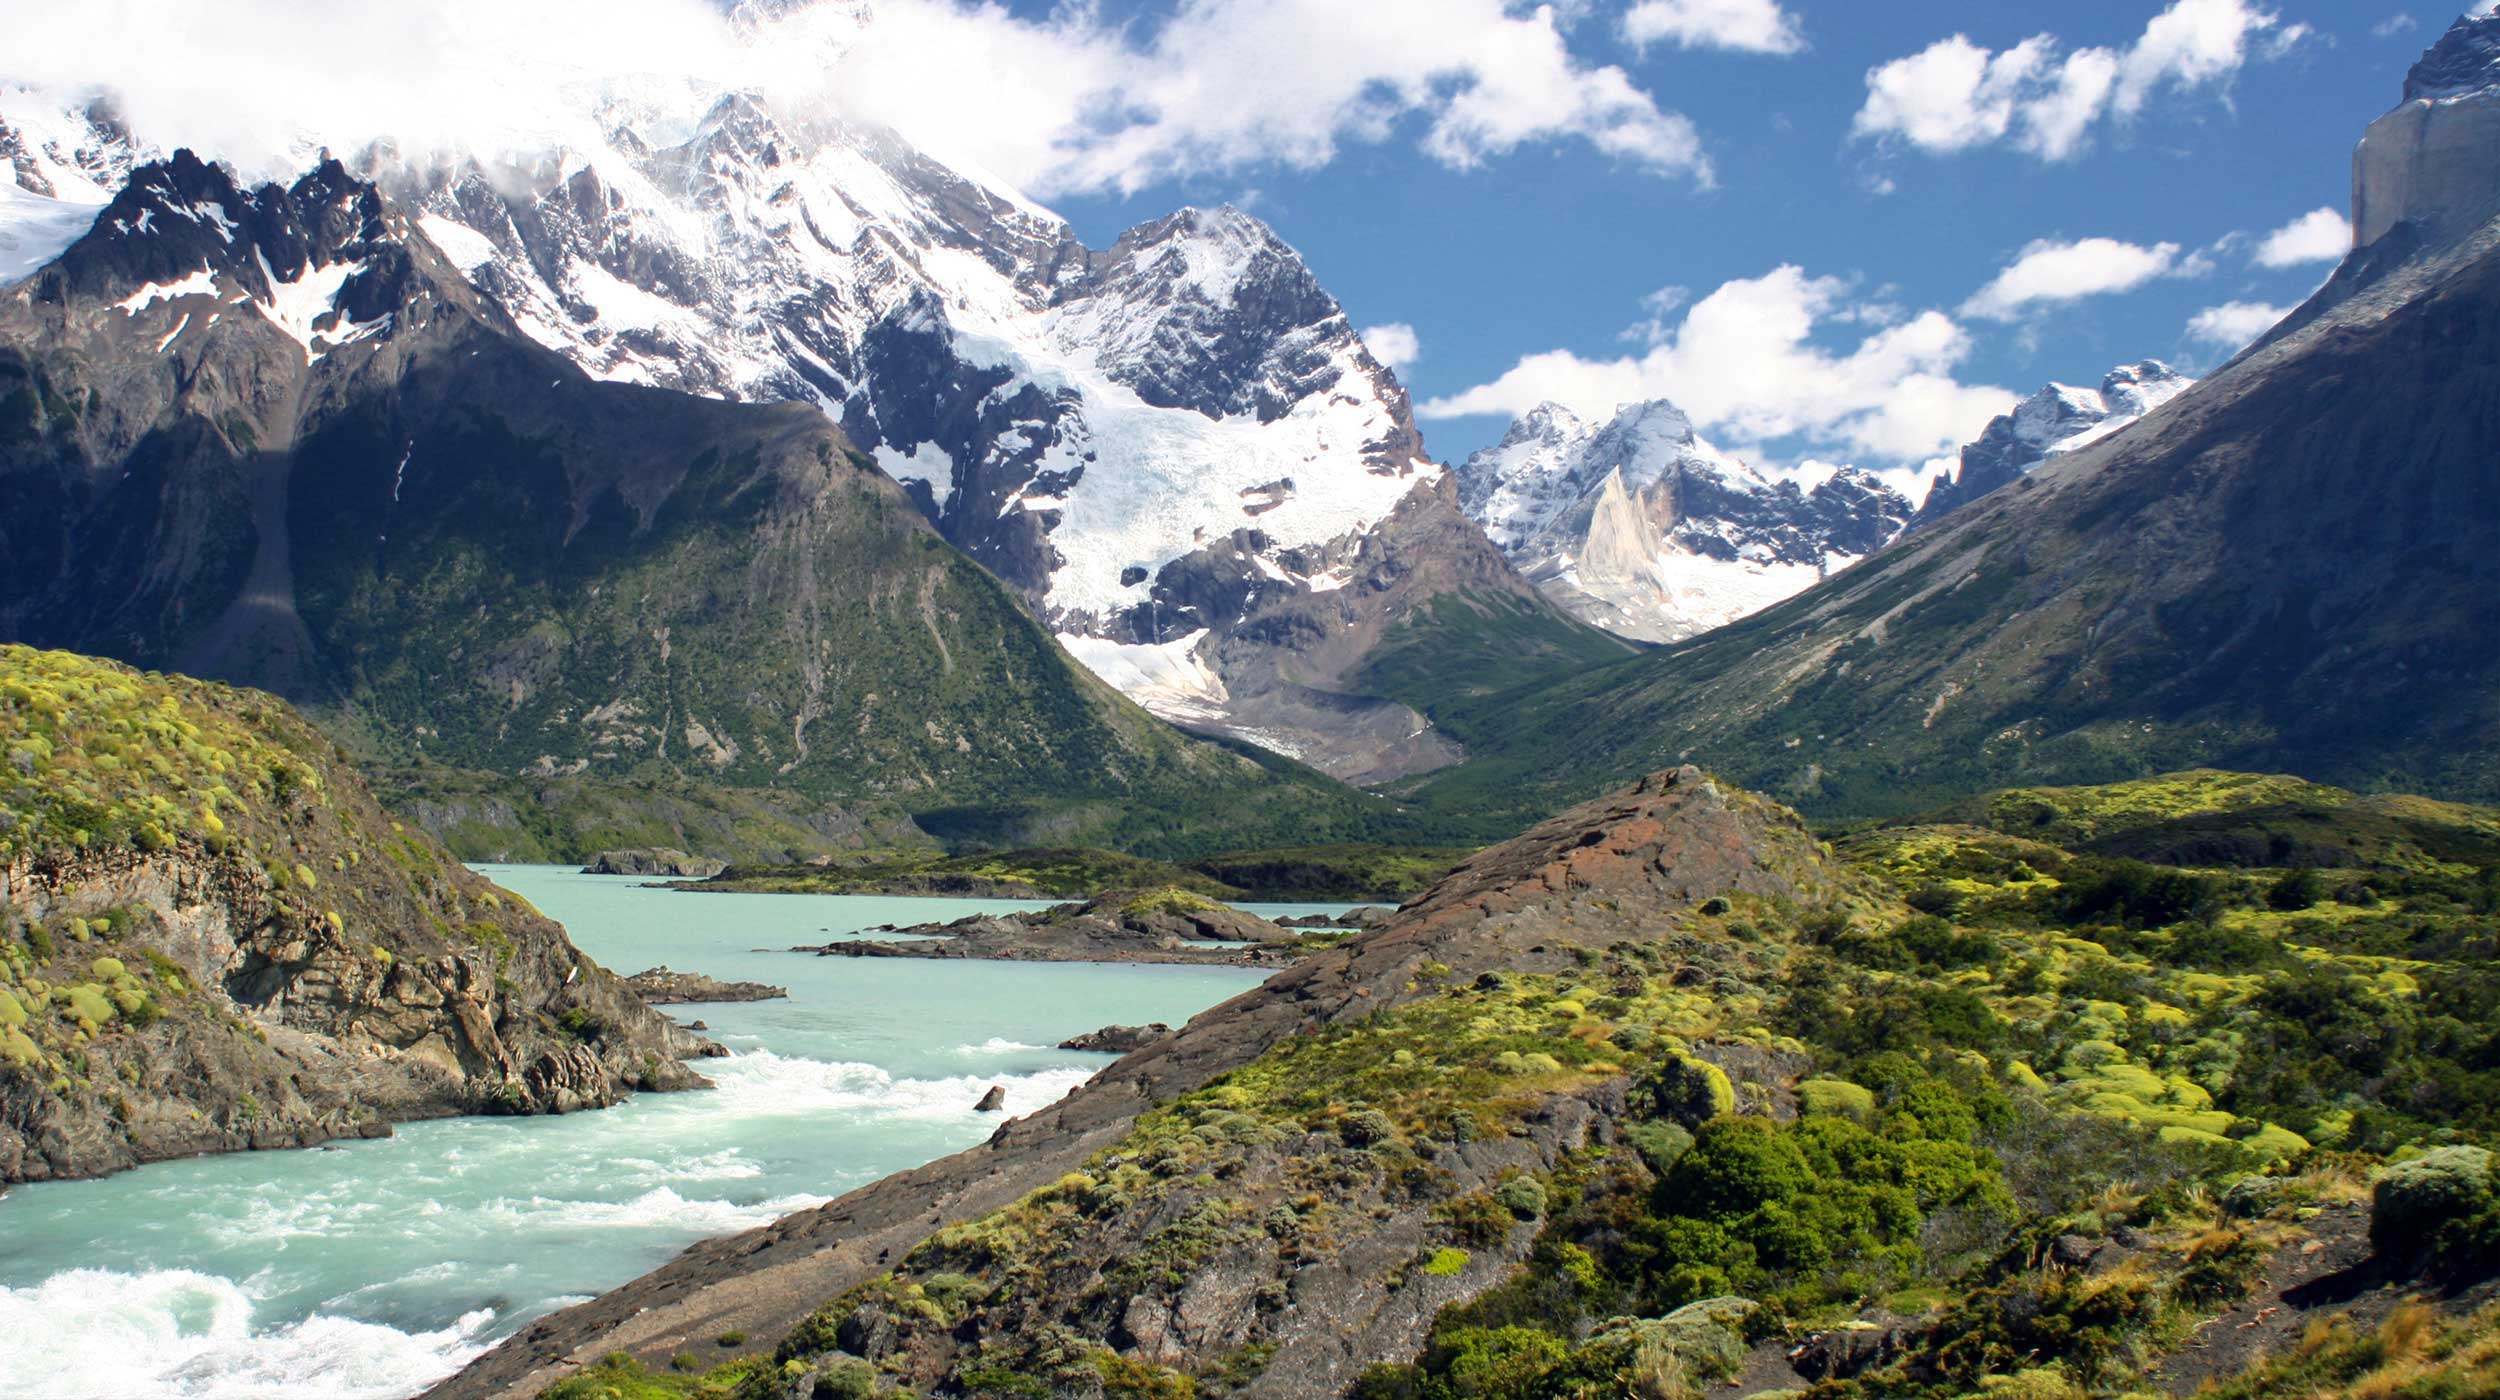 Mountain range, river, and forest in Torres del Paine National Park, Patagonia, Chile